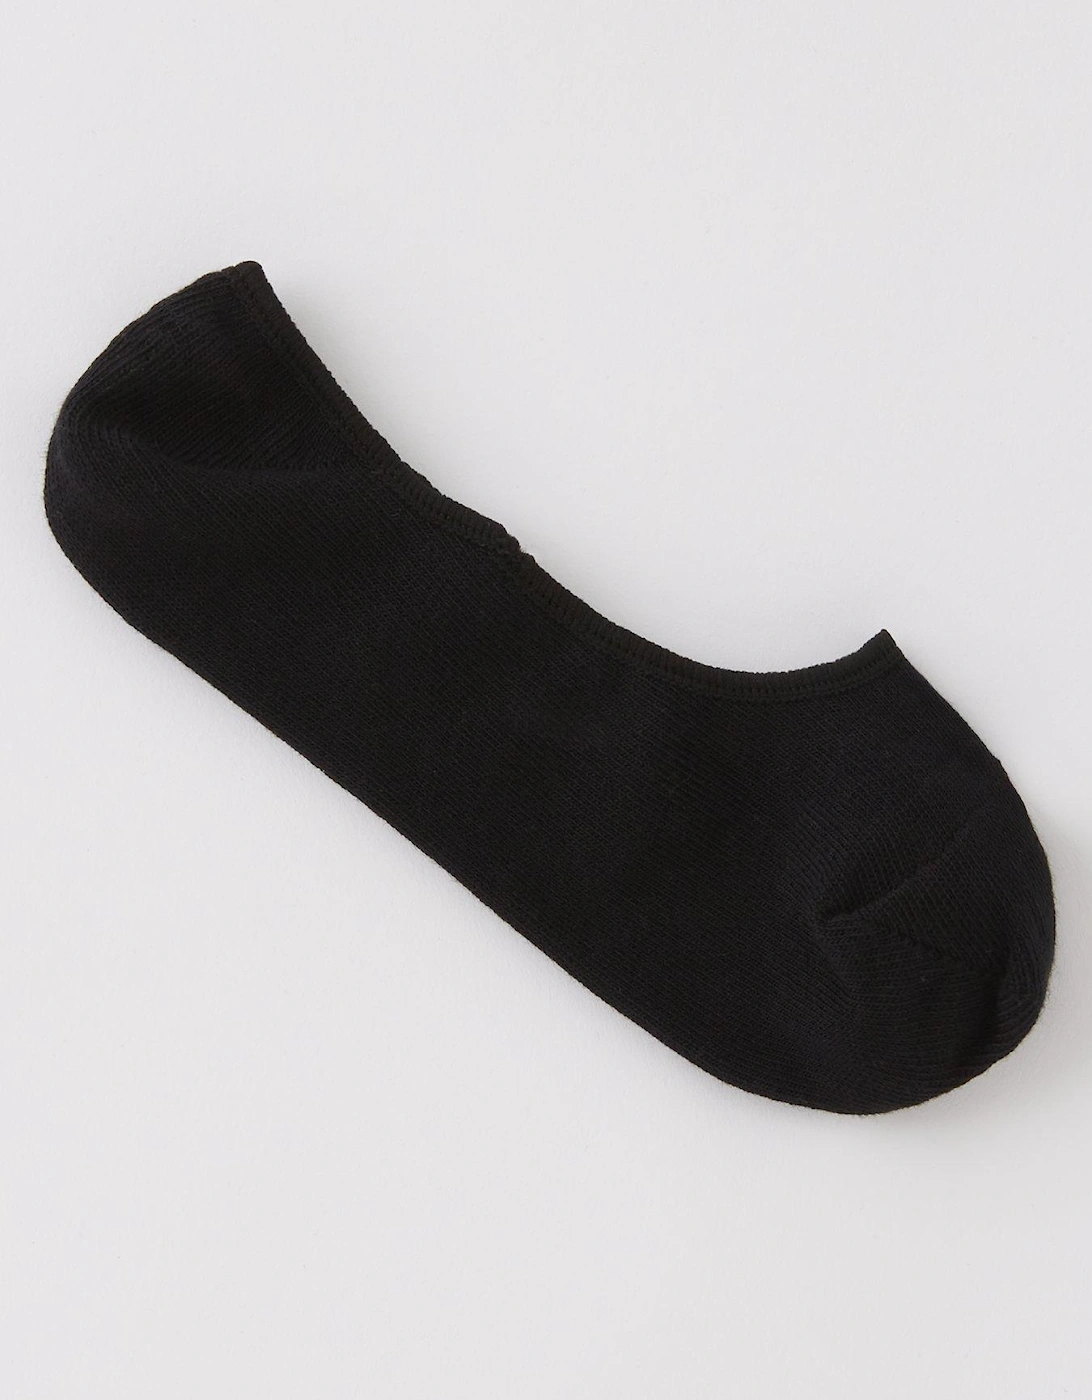 3 Pack of Invisible Trainer Liner Socks With Heel Grips - Black